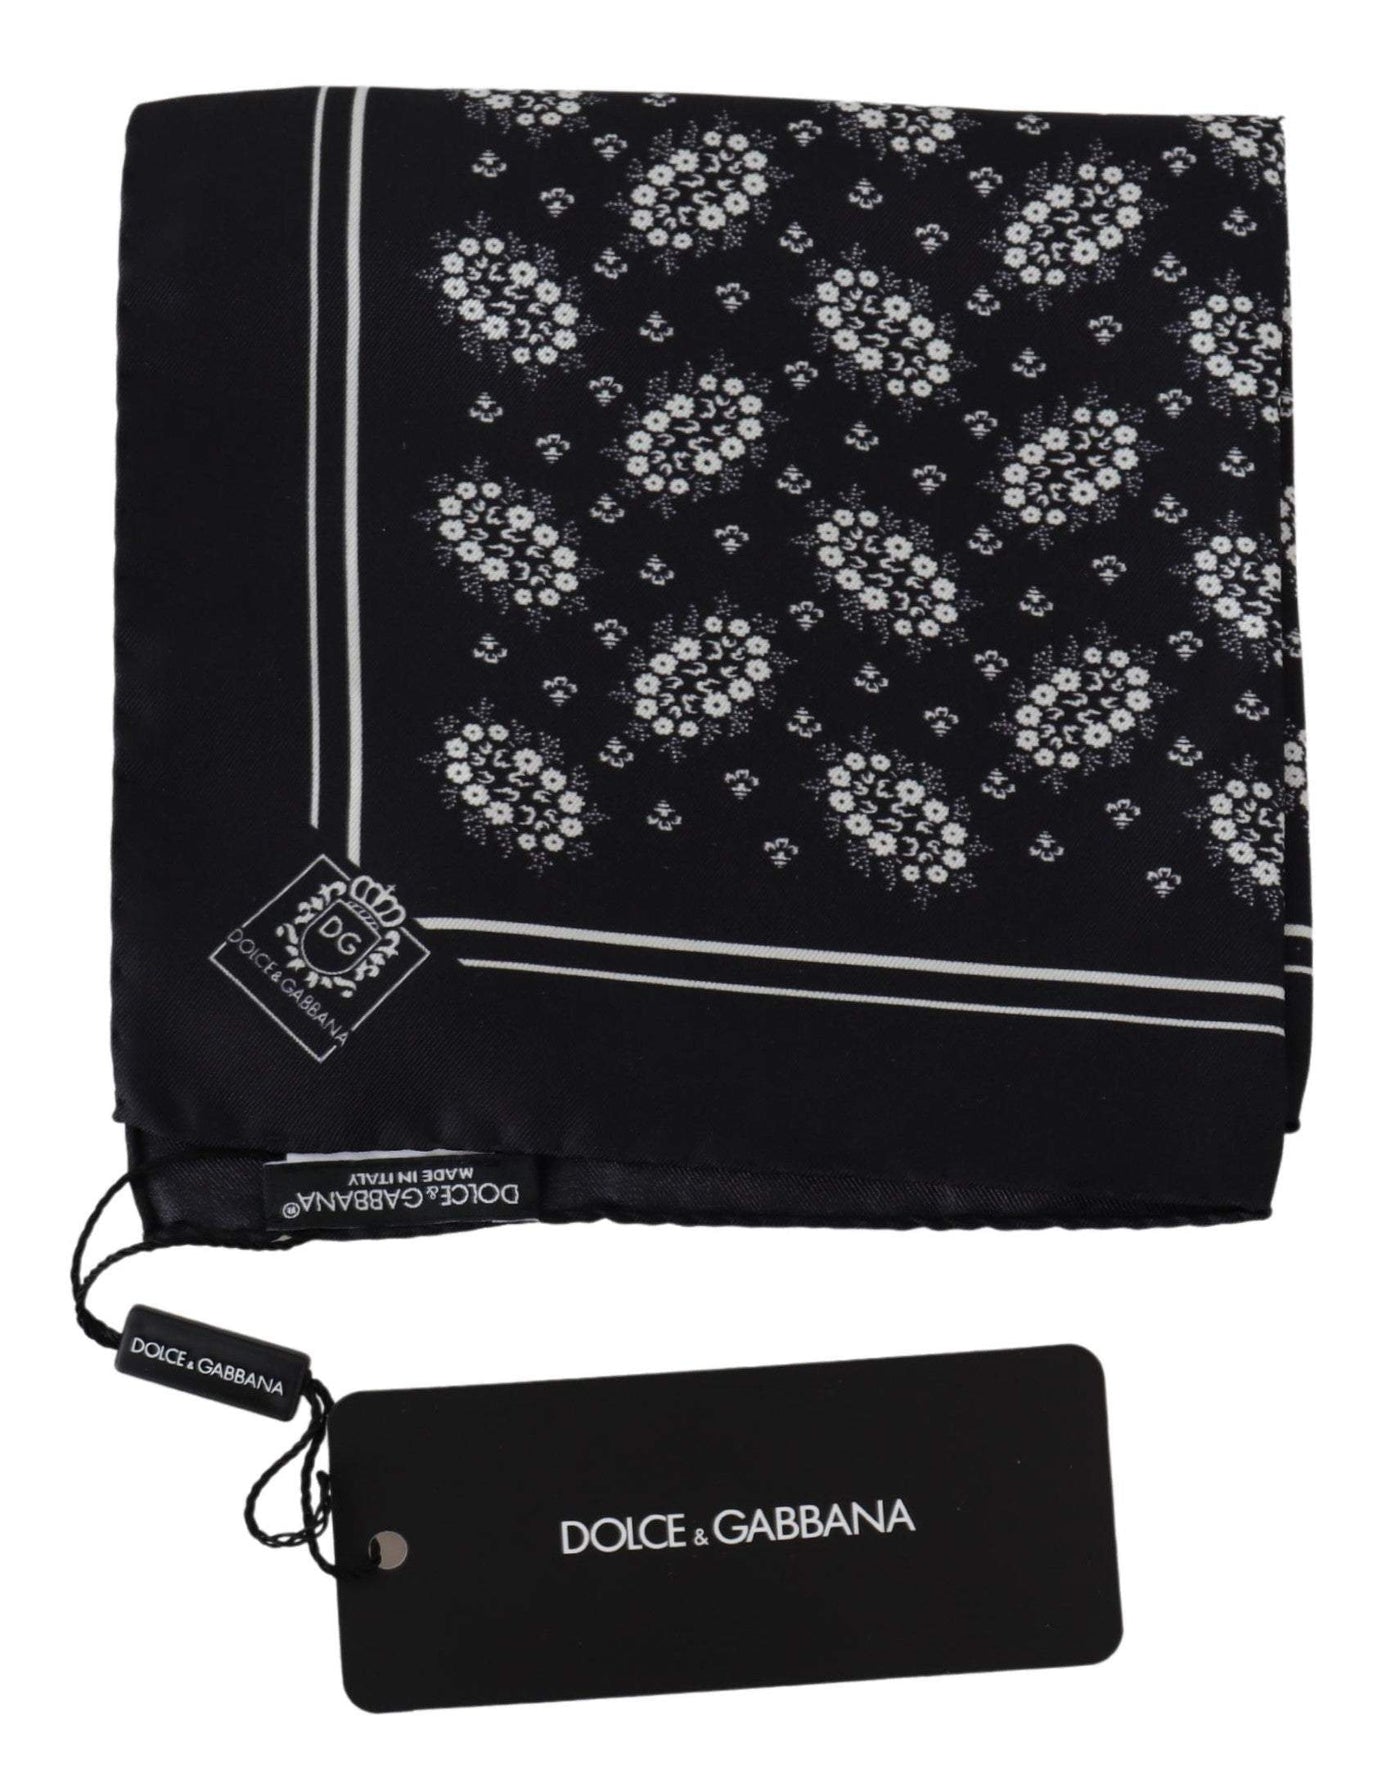 Dolce & Gabbana Black Patterned Square Scarf  Silk  Handkerchief #men, Accessories - New Arrivals, Black, Dolce & Gabbana, feed-agegroup-adult, feed-color-Black, feed-gender-male, Handkerchief - Men - Accessories at SEYMAYKA